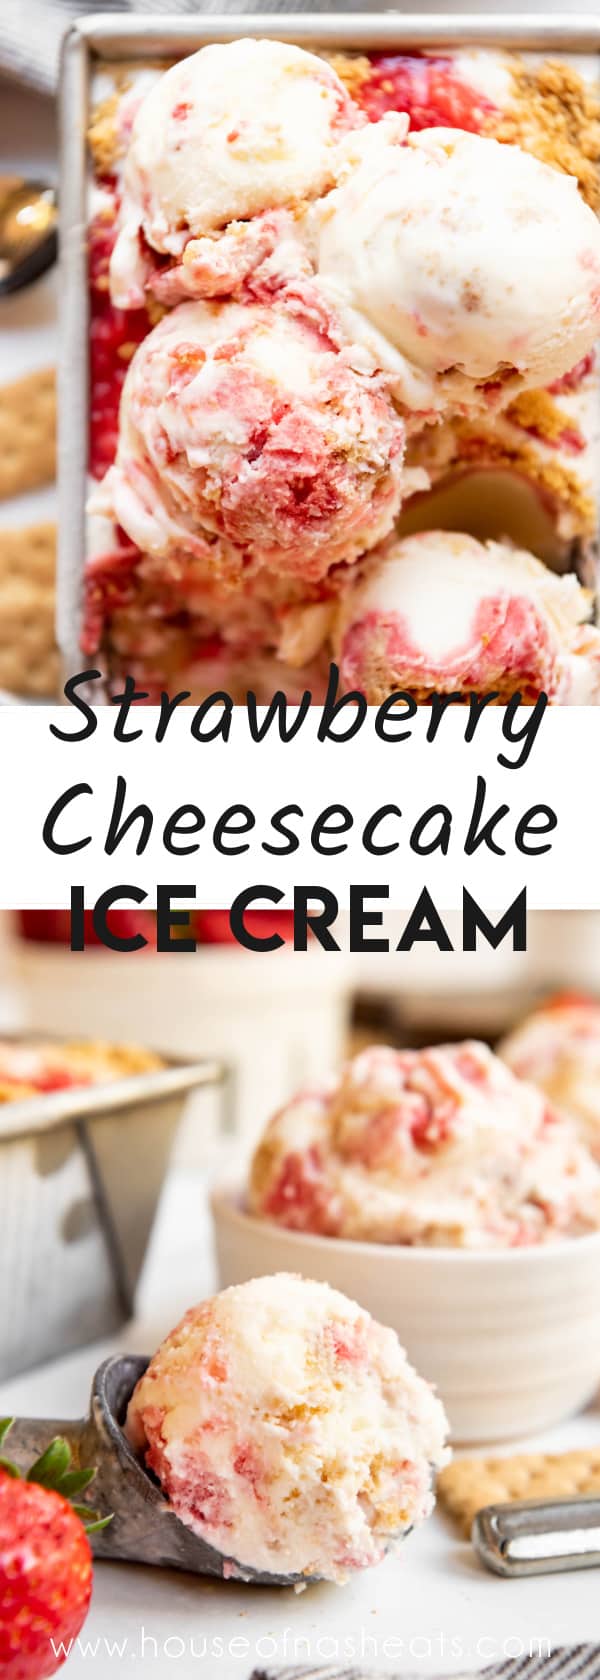 A collage of images of strawberry cheesecake ice cream with text overlay.